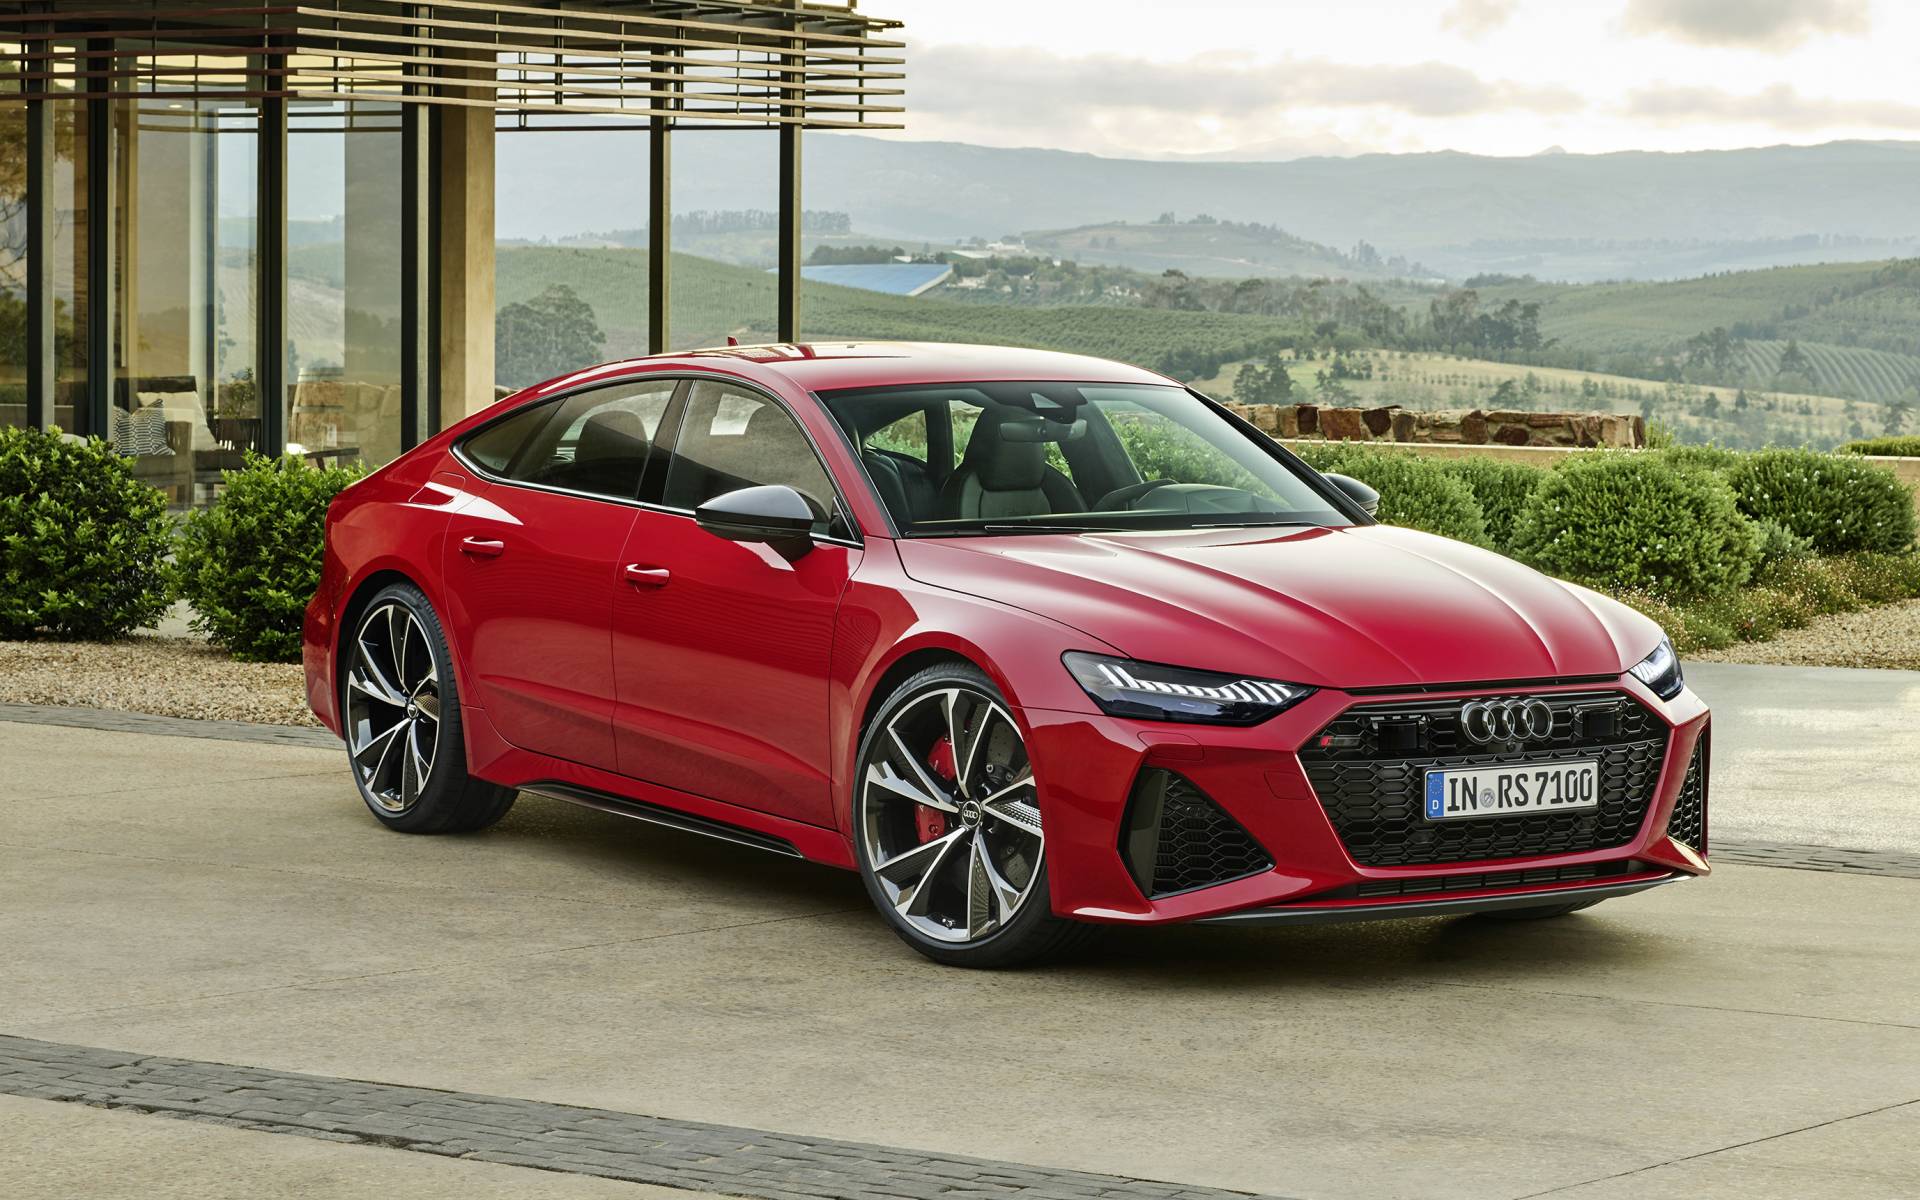 2020 Audi A7 - News, reviews, picture galleries and videos - The Car Guide